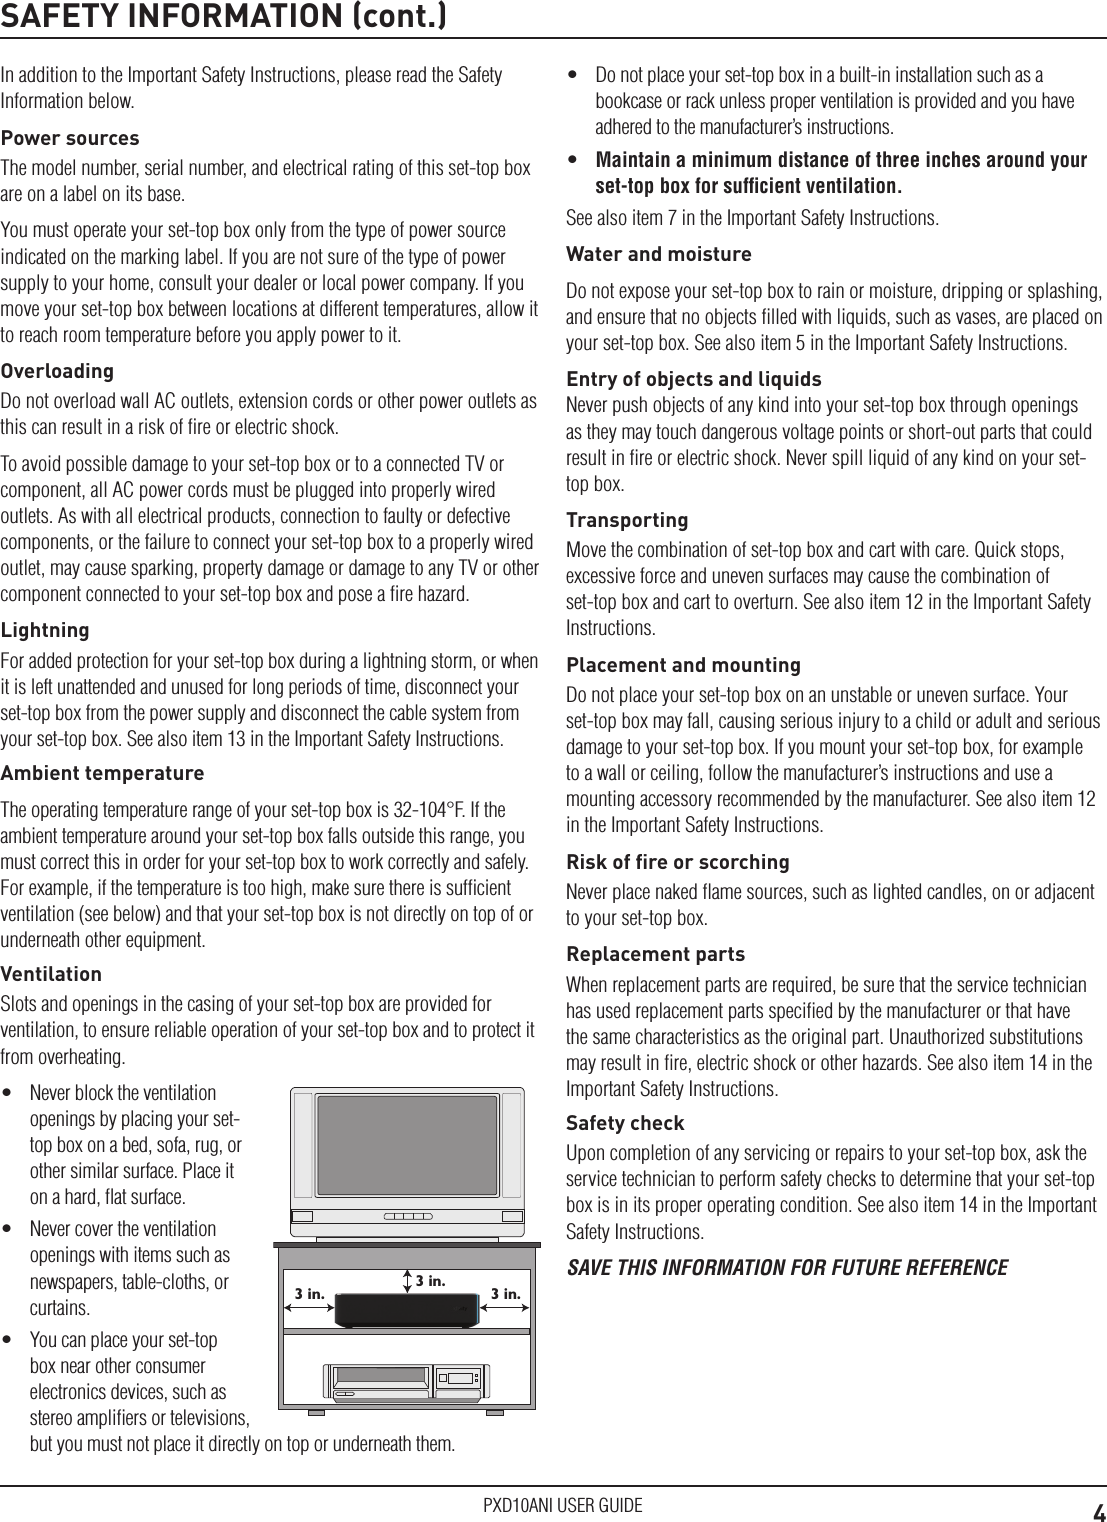 4PXD10ANI USER GUIDESAFETY INFORMATION (cont.)In addition to the Important Safety Instructions, please read the Safety Information below.Power sourcesThe model number, serial number, and electrical rating of this set-top box are on a label on its base.You must operate your set-top box only from the type of power source indicated on the marking label. If you are not sure of the type of power supply to your home, consult your dealer or local power company. If you move your set-top box between locations at different temperatures, allow it to reach room temperature before you apply power to it.OverloadingDo not overload wall AC outlets, extension cords or other power outlets as this can result in a risk of ﬁre or electric shock.To avoid possible damage to your set-top box or to a connected TV or component, all AC power cords must be plugged into properly wired outlets. As with all electrical products, connection to faulty or defective components, or the failure to connect your set-top box to a properly wired outlet, may cause sparking, property damage or damage to any TV or other component connected to your set-top box and pose a ﬁre hazard.LightningFor added protection for your set-top box during a lightning storm, or when it is left unattended and unused for long periods of time, disconnect your set-top box from the power supply and disconnect the cable system from your set-top box. See also item 13 in the Important Safety Instructions.Ambient temperatureThe operating temperature range of your set-top box is 32-104°F. If the ambient temperature around your set-top box falls outside this range, you must correct this in order for your set-top box to work correctly and safely. For example, if the temperature is too high, make sure there is sufﬁcient ventilation (see below) and that your set-top box is not directly on top of or underneath other equipment.VentilationSlots and openings in the casing of your set-top box are provided for ventilation, to ensure reliable operation of your set-top box and to protect it from overheating.•  Never block the ventilation openings by placing your set-top box on a bed, sofa, rug, or other similar surface. Place it on a hard, ﬂat surface.•  Never cover the ventilation openings with items such as newspapers, table-cloths, or curtains.•  You can place your set-top box near other consumer electronics devices, such as stereo ampliﬁers or televisions, but you must not place it directly on top or underneath them.3 in.3 in.3 in.•  Do not place your set-top box in a built-in installation such as a bookcase or rack unless proper ventilation is provided and you have adhered to the manufacturer’s instructions.•  Maintain a minimum distance of three inches around your set-top box for sufﬁcient ventilation.See also item 7 in the Important Safety Instructions.Water and moistureDo not expose your set-top box to rain or moisture, dripping or splashing, and ensure that no objects ﬁlled with liquids, such as vases, are placed on your set-top box. See also item 5 in the Important Safety Instructions.Entry of objects and liquidsNever push objects of any kind into your set-top box through openings as they may touch dangerous voltage points or short-out parts that could result in ﬁre or electric shock. Never spill liquid of any kind on your set-top box.TransportingMove the combination of set-top box and cart with care. Quick stops, excessive force and uneven surfaces may cause the combination of set-top box and cart to overturn. See also item 12 in the Important Safety Instructions.Placement and mountingDo not place your set-top box on an unstable or uneven surface. Your set-top box may fall, causing serious injury to a child or adult and serious damage to your set-top box. If you mount your set-top box, for example to a wall or ceiling, follow the manufacturer’s instructions and use a mounting accessory recommended by the manufacturer. See also item 12 in the Important Safety Instructions.Risk of ﬁre or scorchingNever place naked ﬂame sources, such as lighted candles, on or adjacent to your set-top box.Replacement partsWhen replacement parts are required, be sure that the service technician has used replacement parts speciﬁed by the manufacturer or that have the same characteristics as the original part. Unauthorized substitutions may result in ﬁre, electric shock or other hazards. See also item 14 in the Important Safety Instructions.Safety checkUpon completion of any servicing or repairs to your set-top box, ask the service technician to perform safety checks to determine that your set-top box is in its proper operating condition. See also item 14 in the Important Safety Instructions.SAVE THIS INFORMATION FOR FUTURE REFERENCE